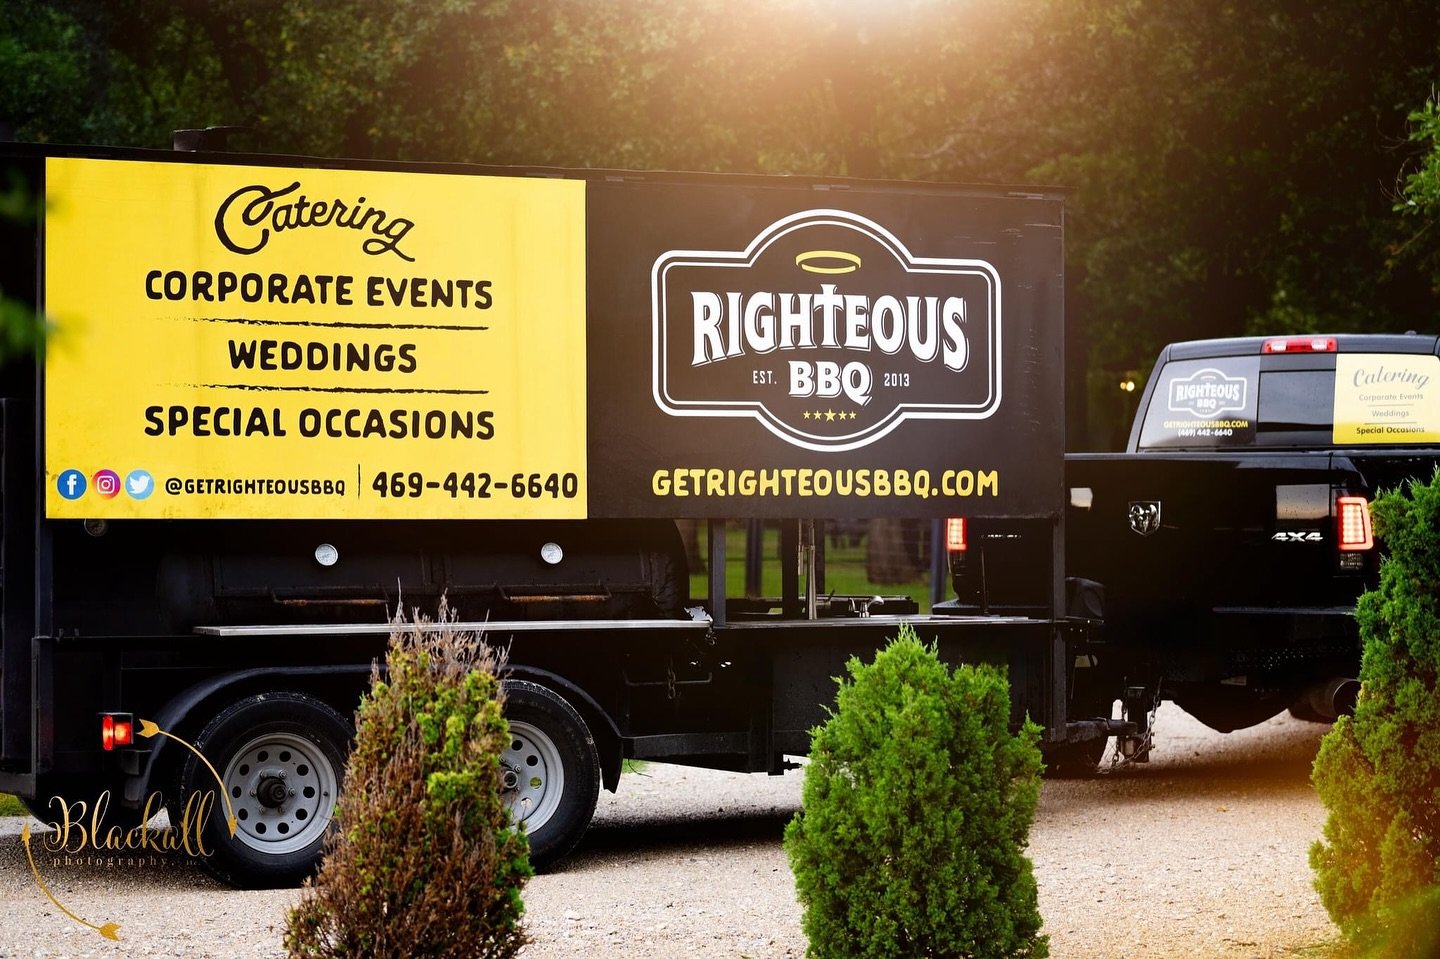 Good and delicious things are in store when you walk into a wedding and see this! @getrighteousbbq 

@bellacavallievents 
@blackallphotography 
@atimetoshinefloraldesign 
@paradiseprodjs 
@thekristaann 
@looksbygracerao
@getrighteousbbq 
@bblewisvill